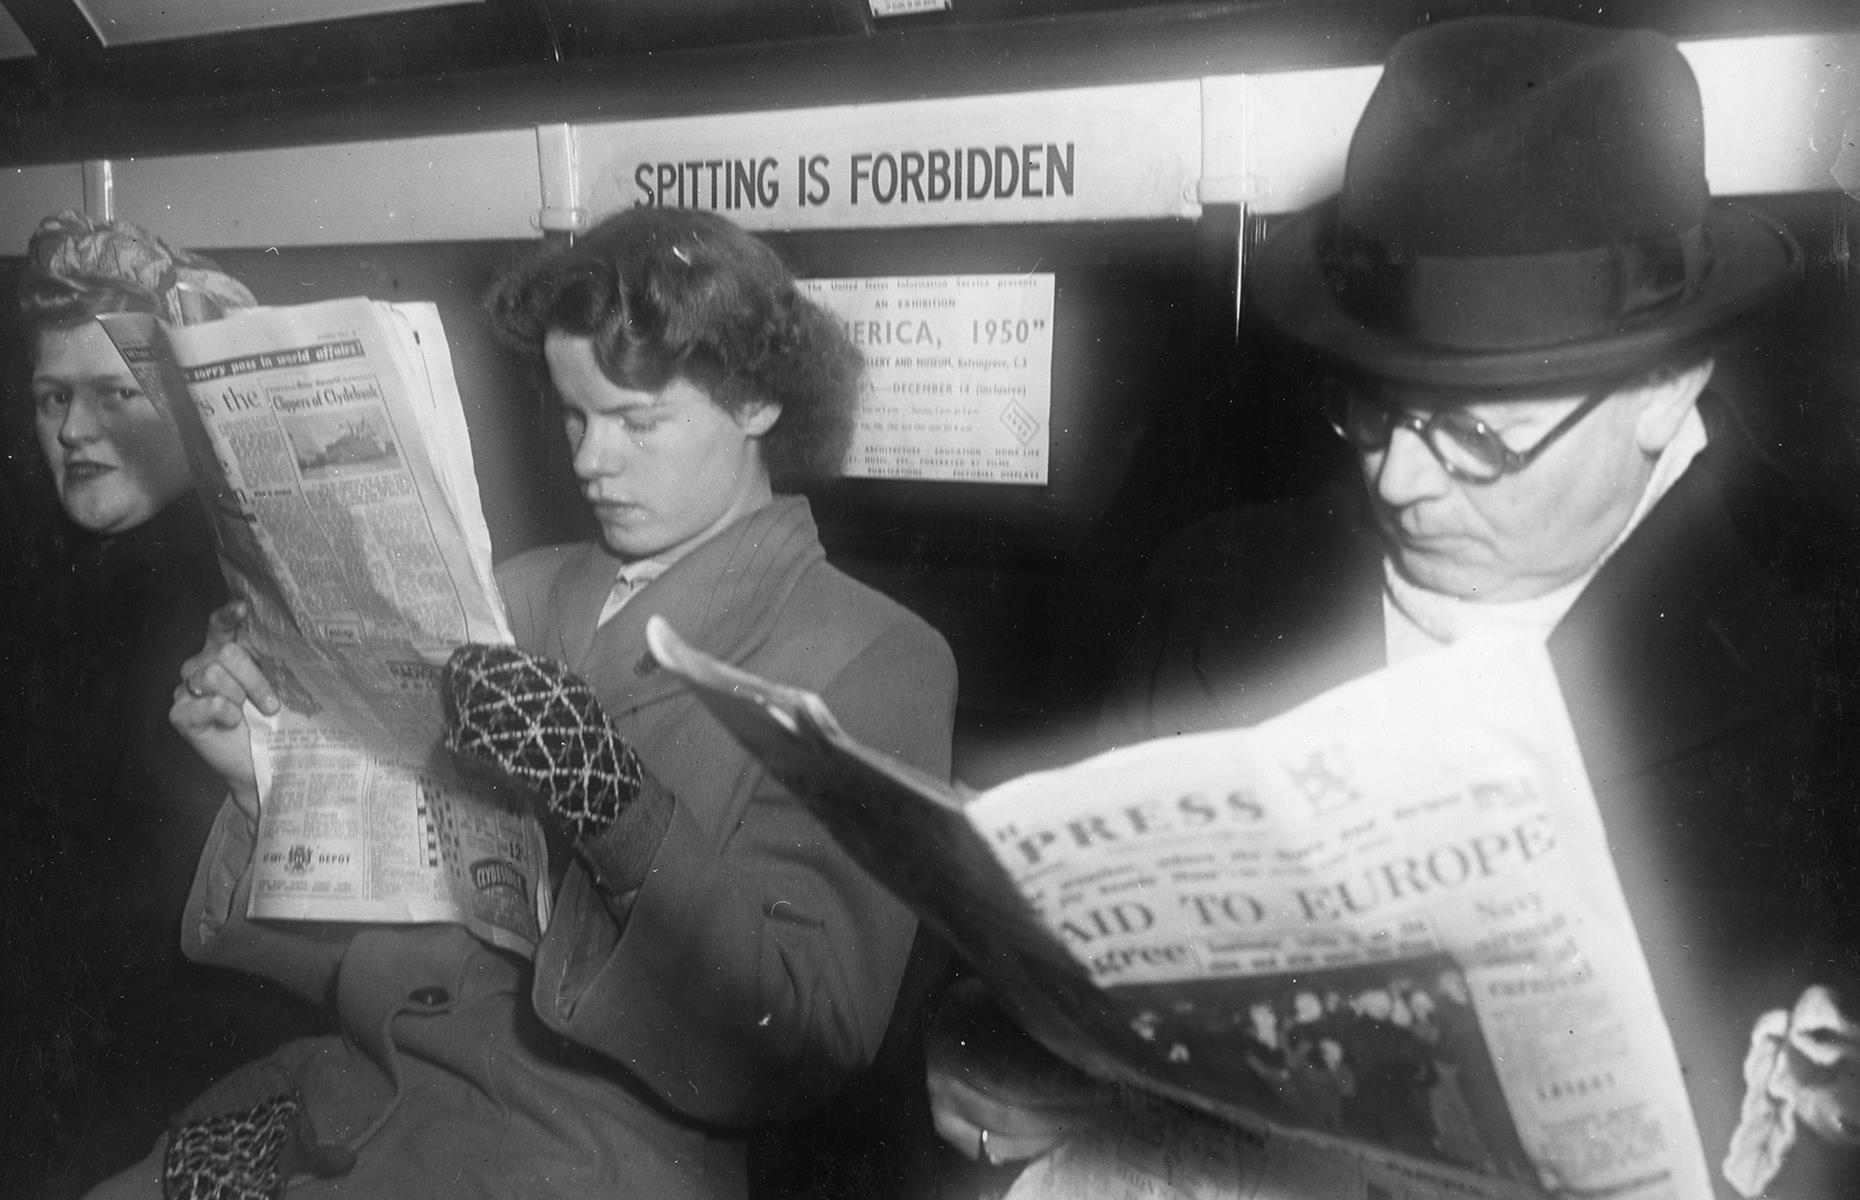 The Glasgow Subway is one of the oldest underground metro networks in the world – second only to London and Budapest. The Scottish system opened way back in 1896, but here's a snapshot of it decades later, in 1950. Passengers on board are absorbed in their newspapers and a bold "no spitting" sign grabs attention.